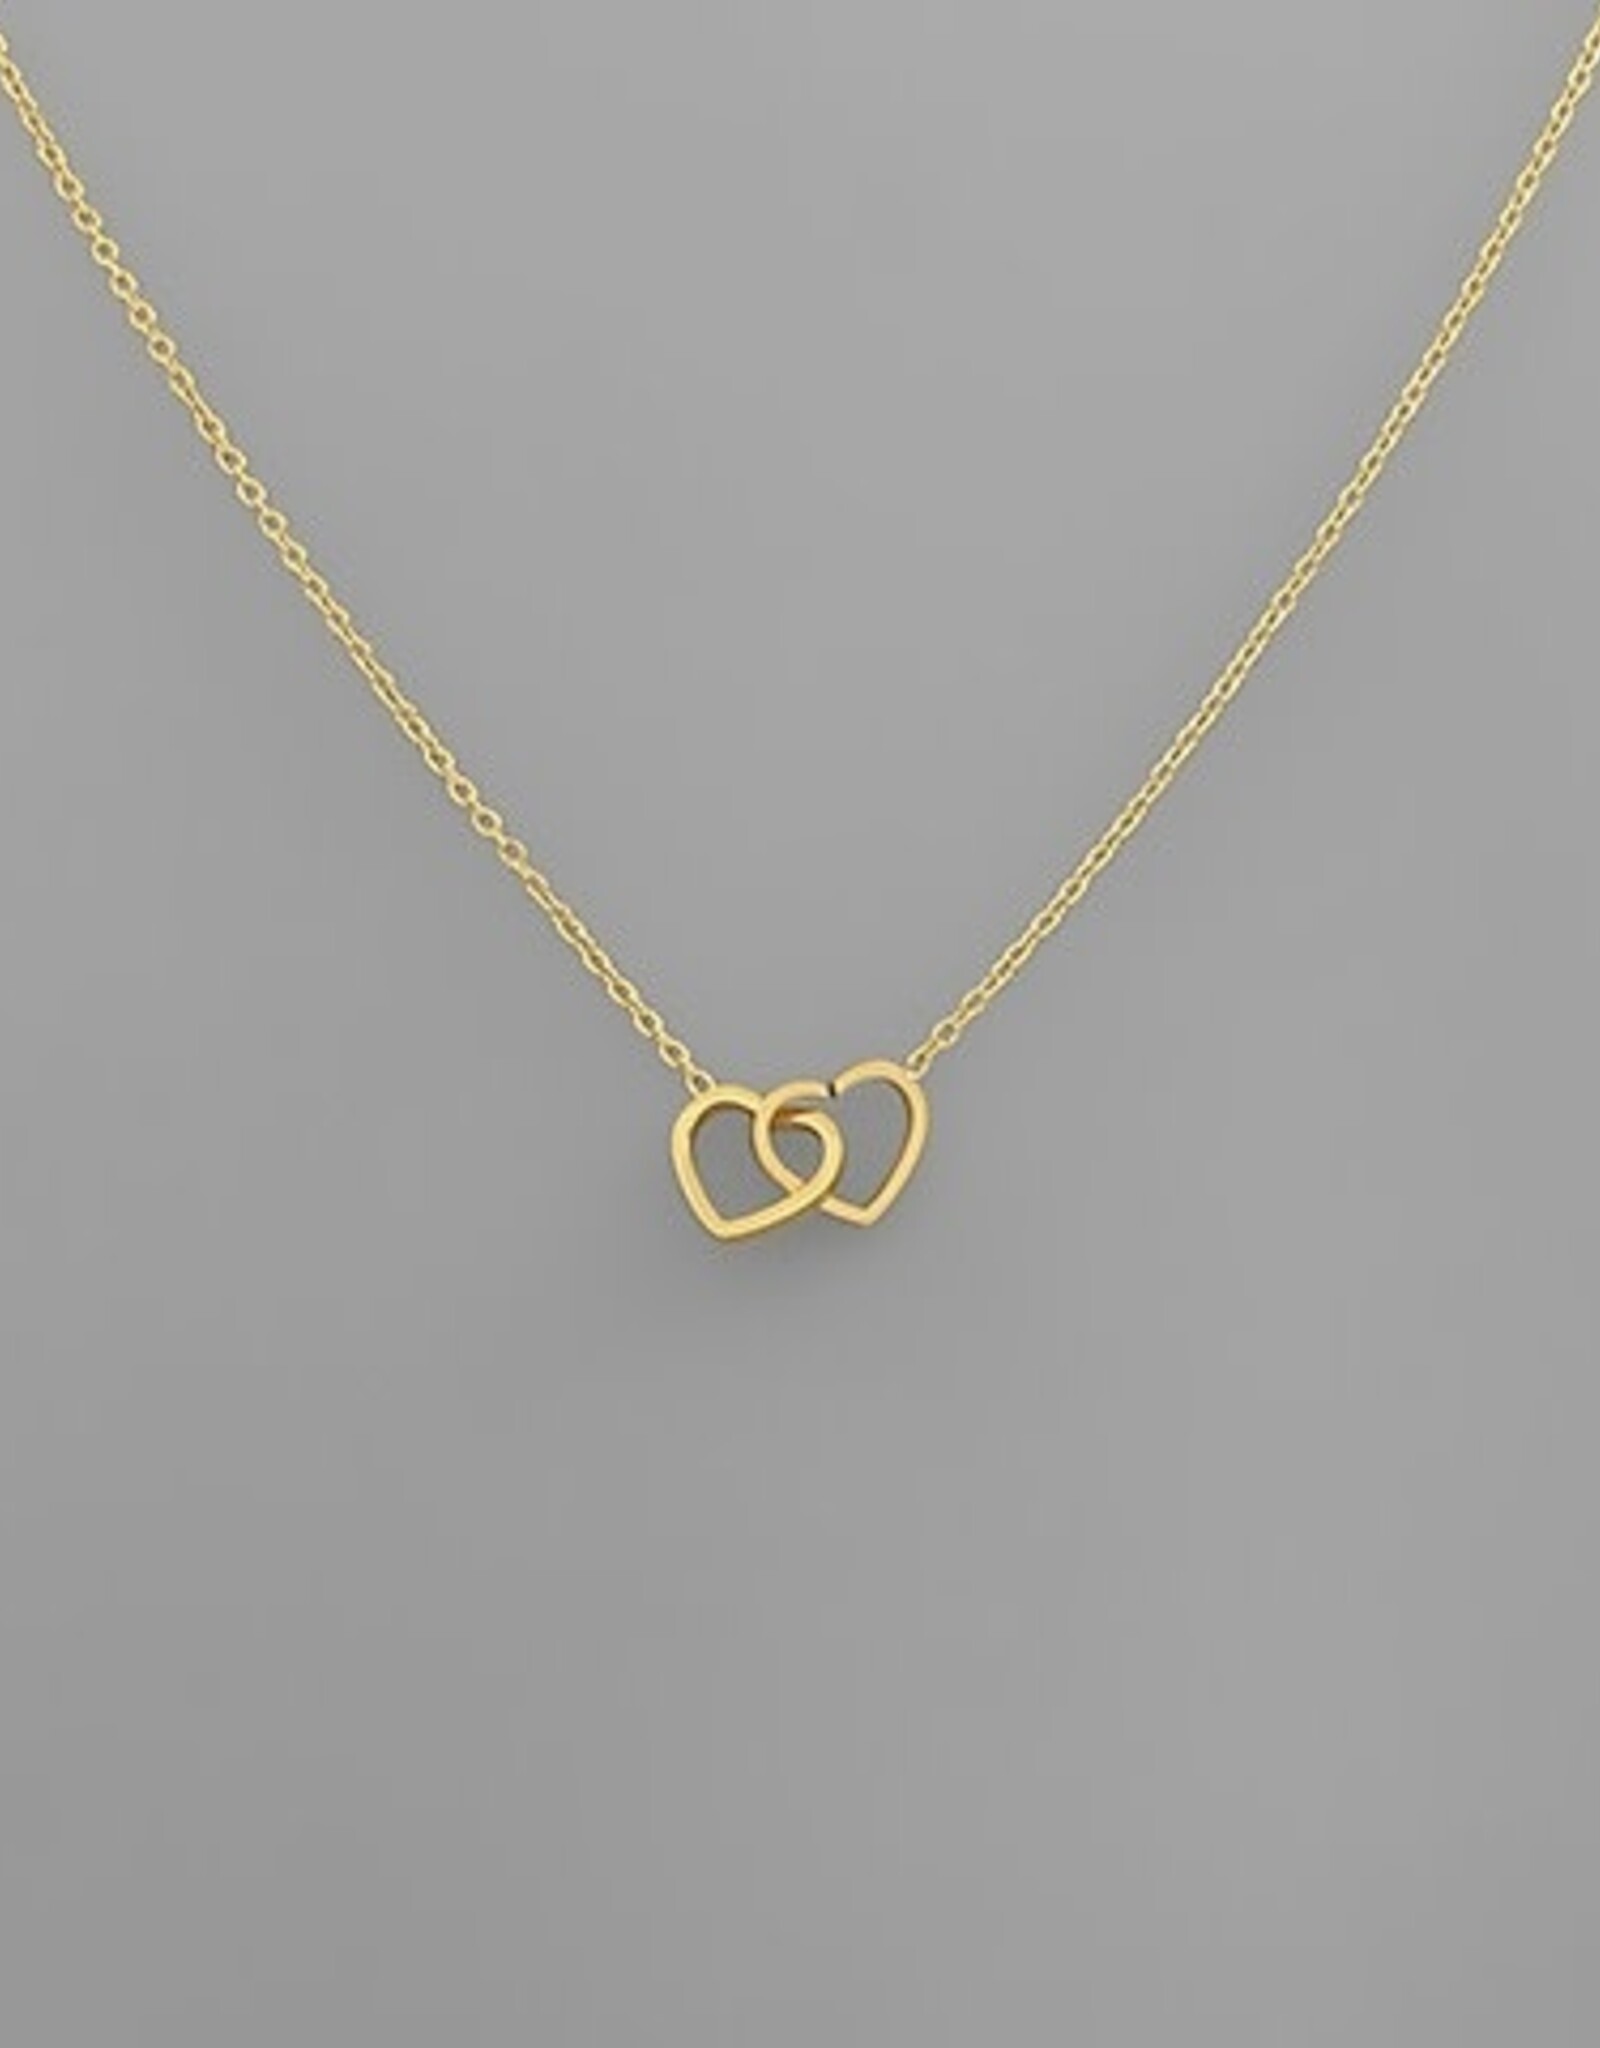 10kt White Gold and Diamond Double Heart Necklace